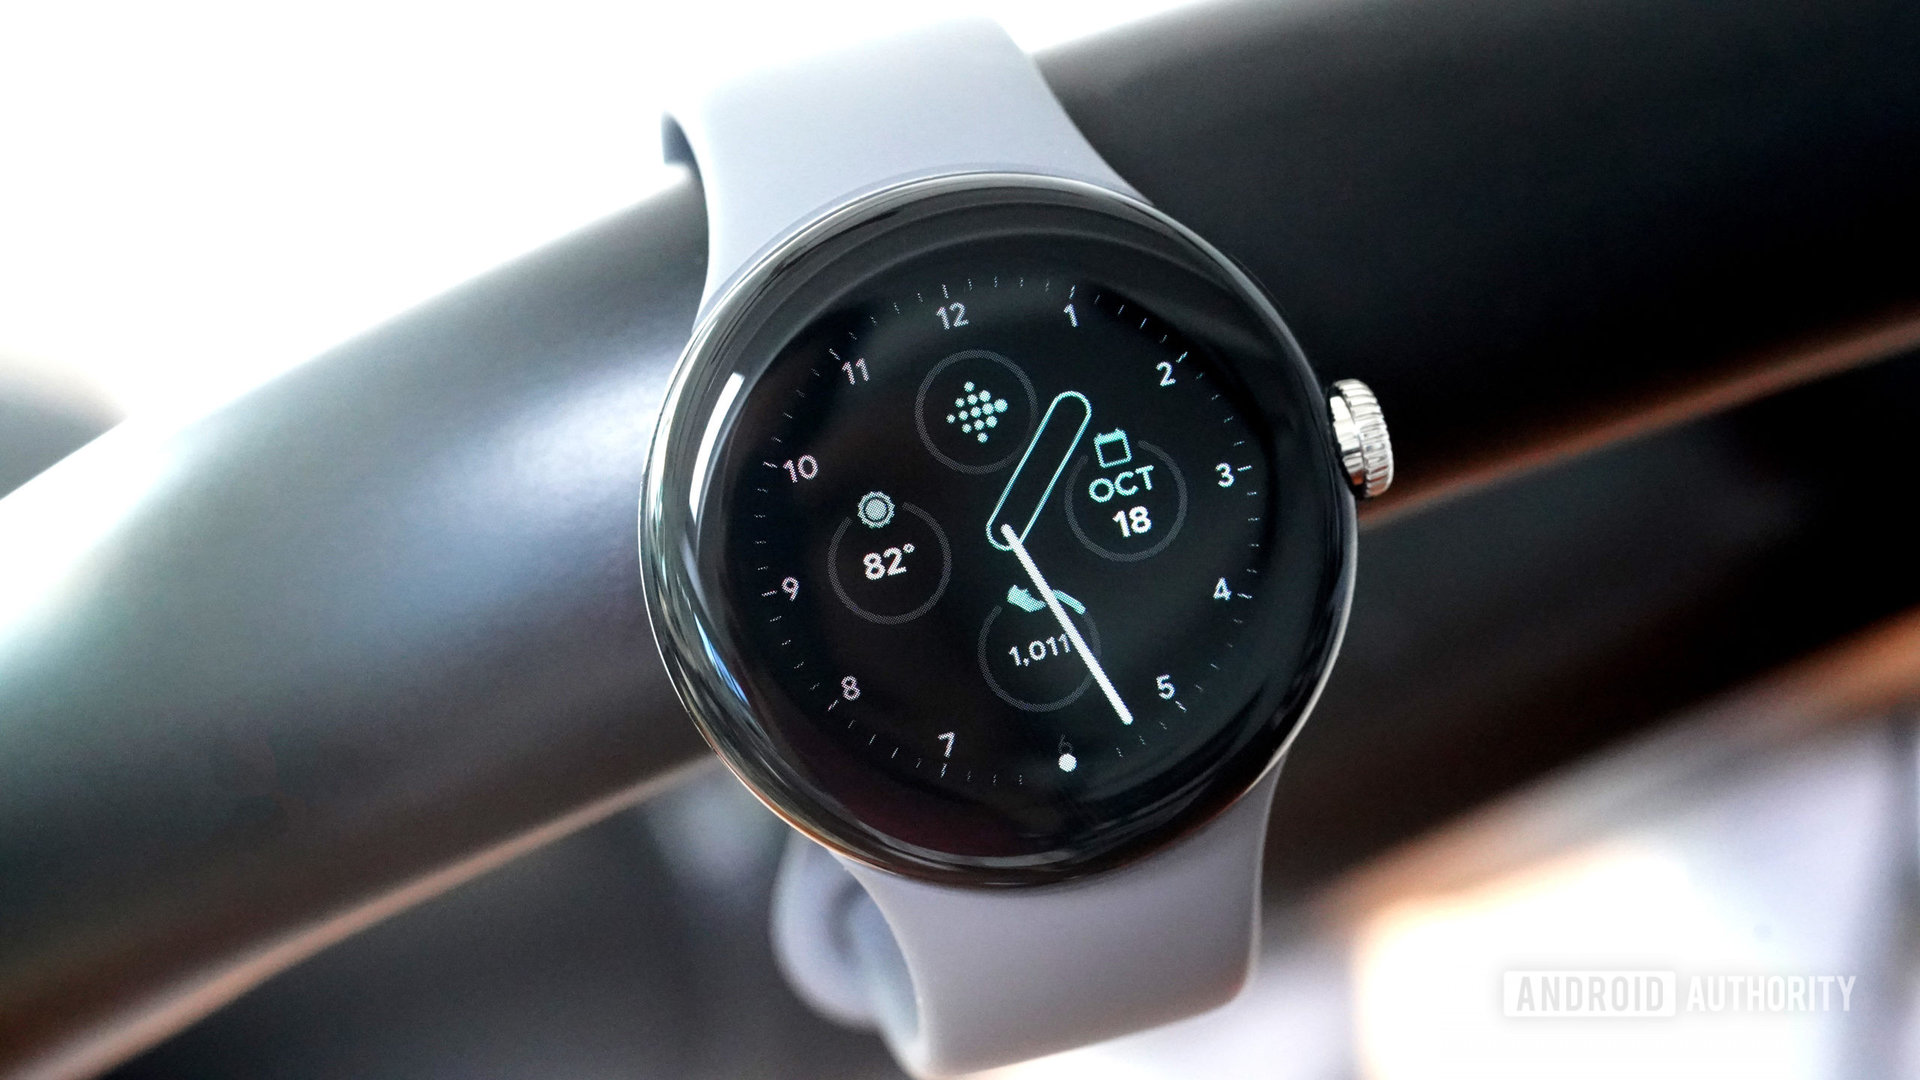 A Google Pixel Watch hangs from a stationary bike displaying the Classic watch face.